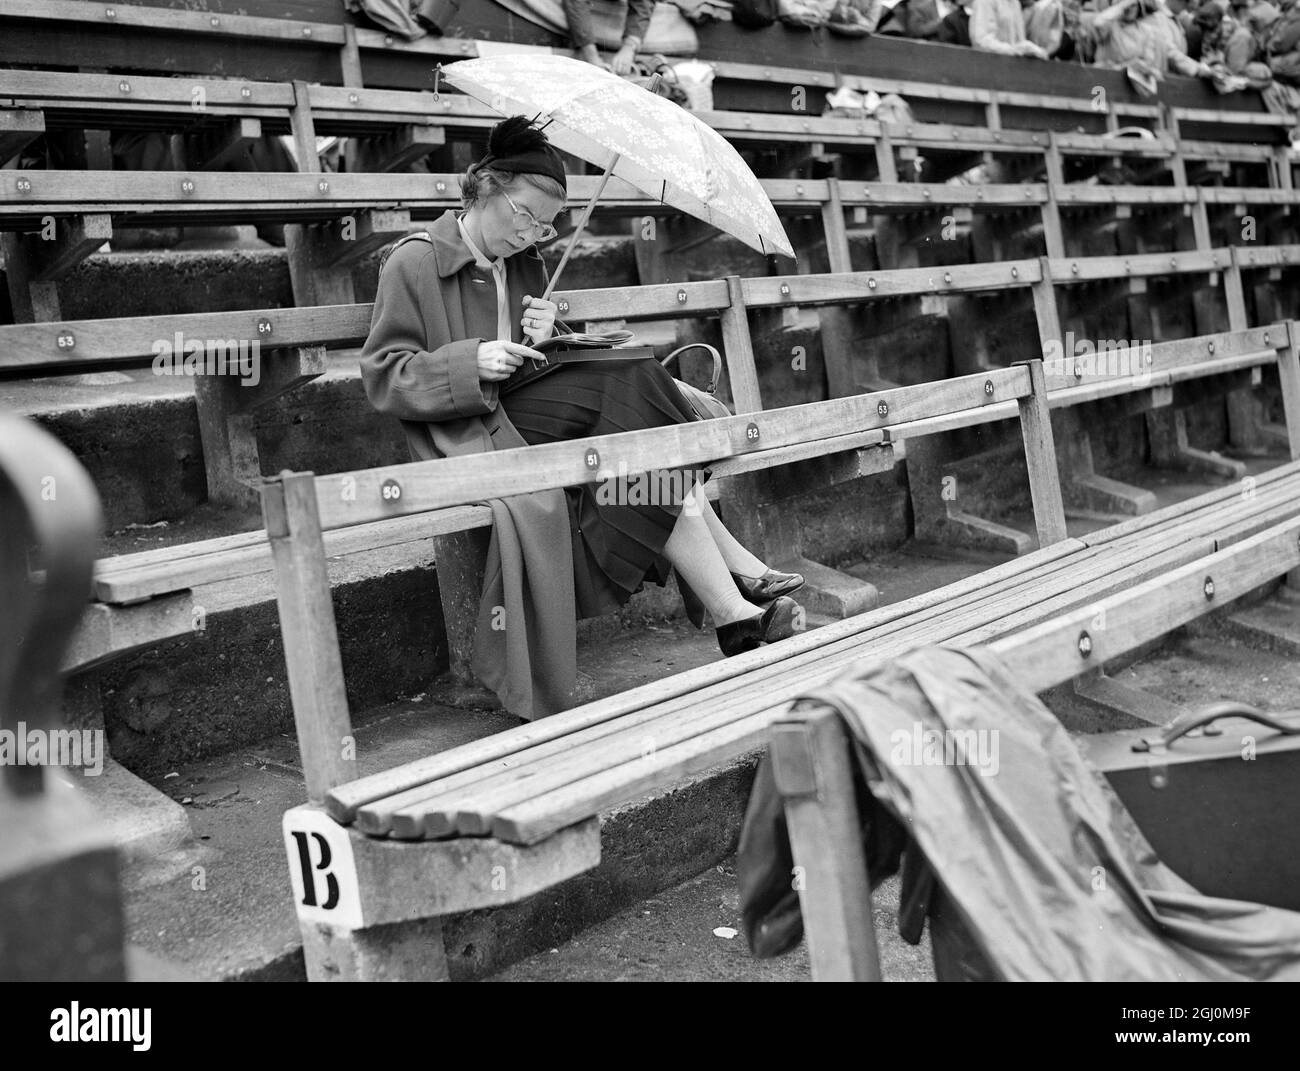 Rain stops play at Wimbledon spectators are shown bearing umbrellas and head covering awaiting break in weather. 3 July 1952 Stock Photo